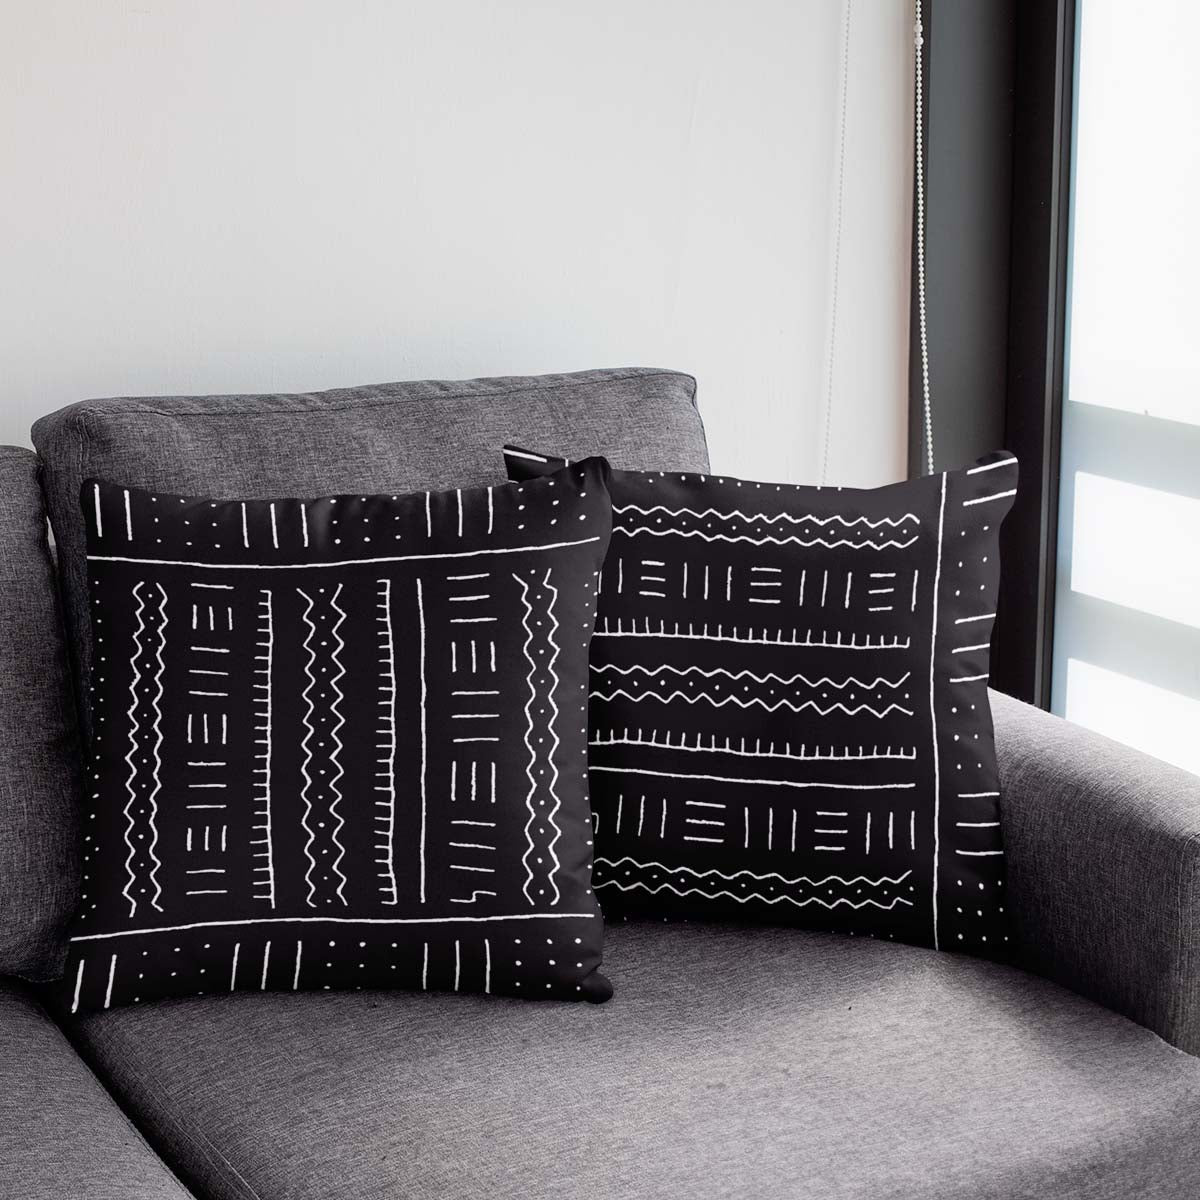 African Cushion Covers – Tribal Black & White Pillow Cases